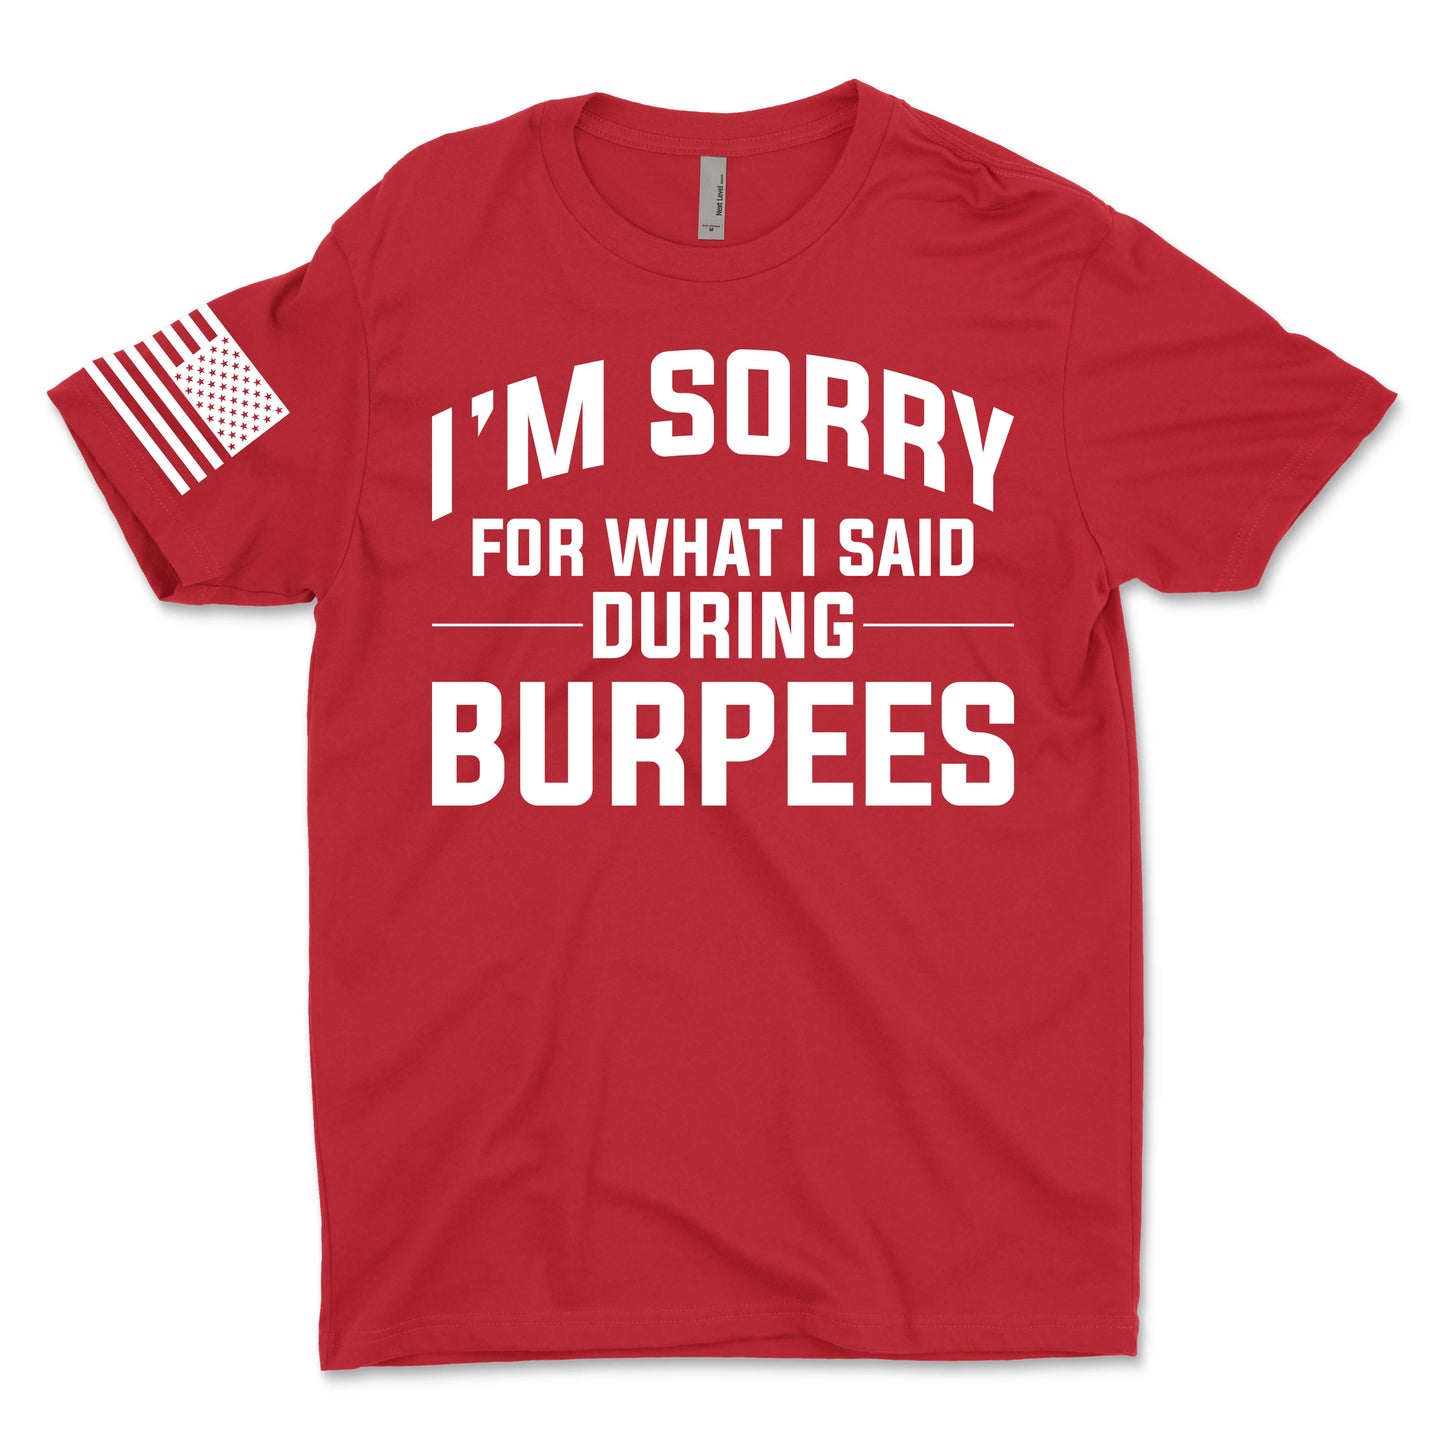 I'm Sorry For What I Said During Burpees Men's T-Shirt